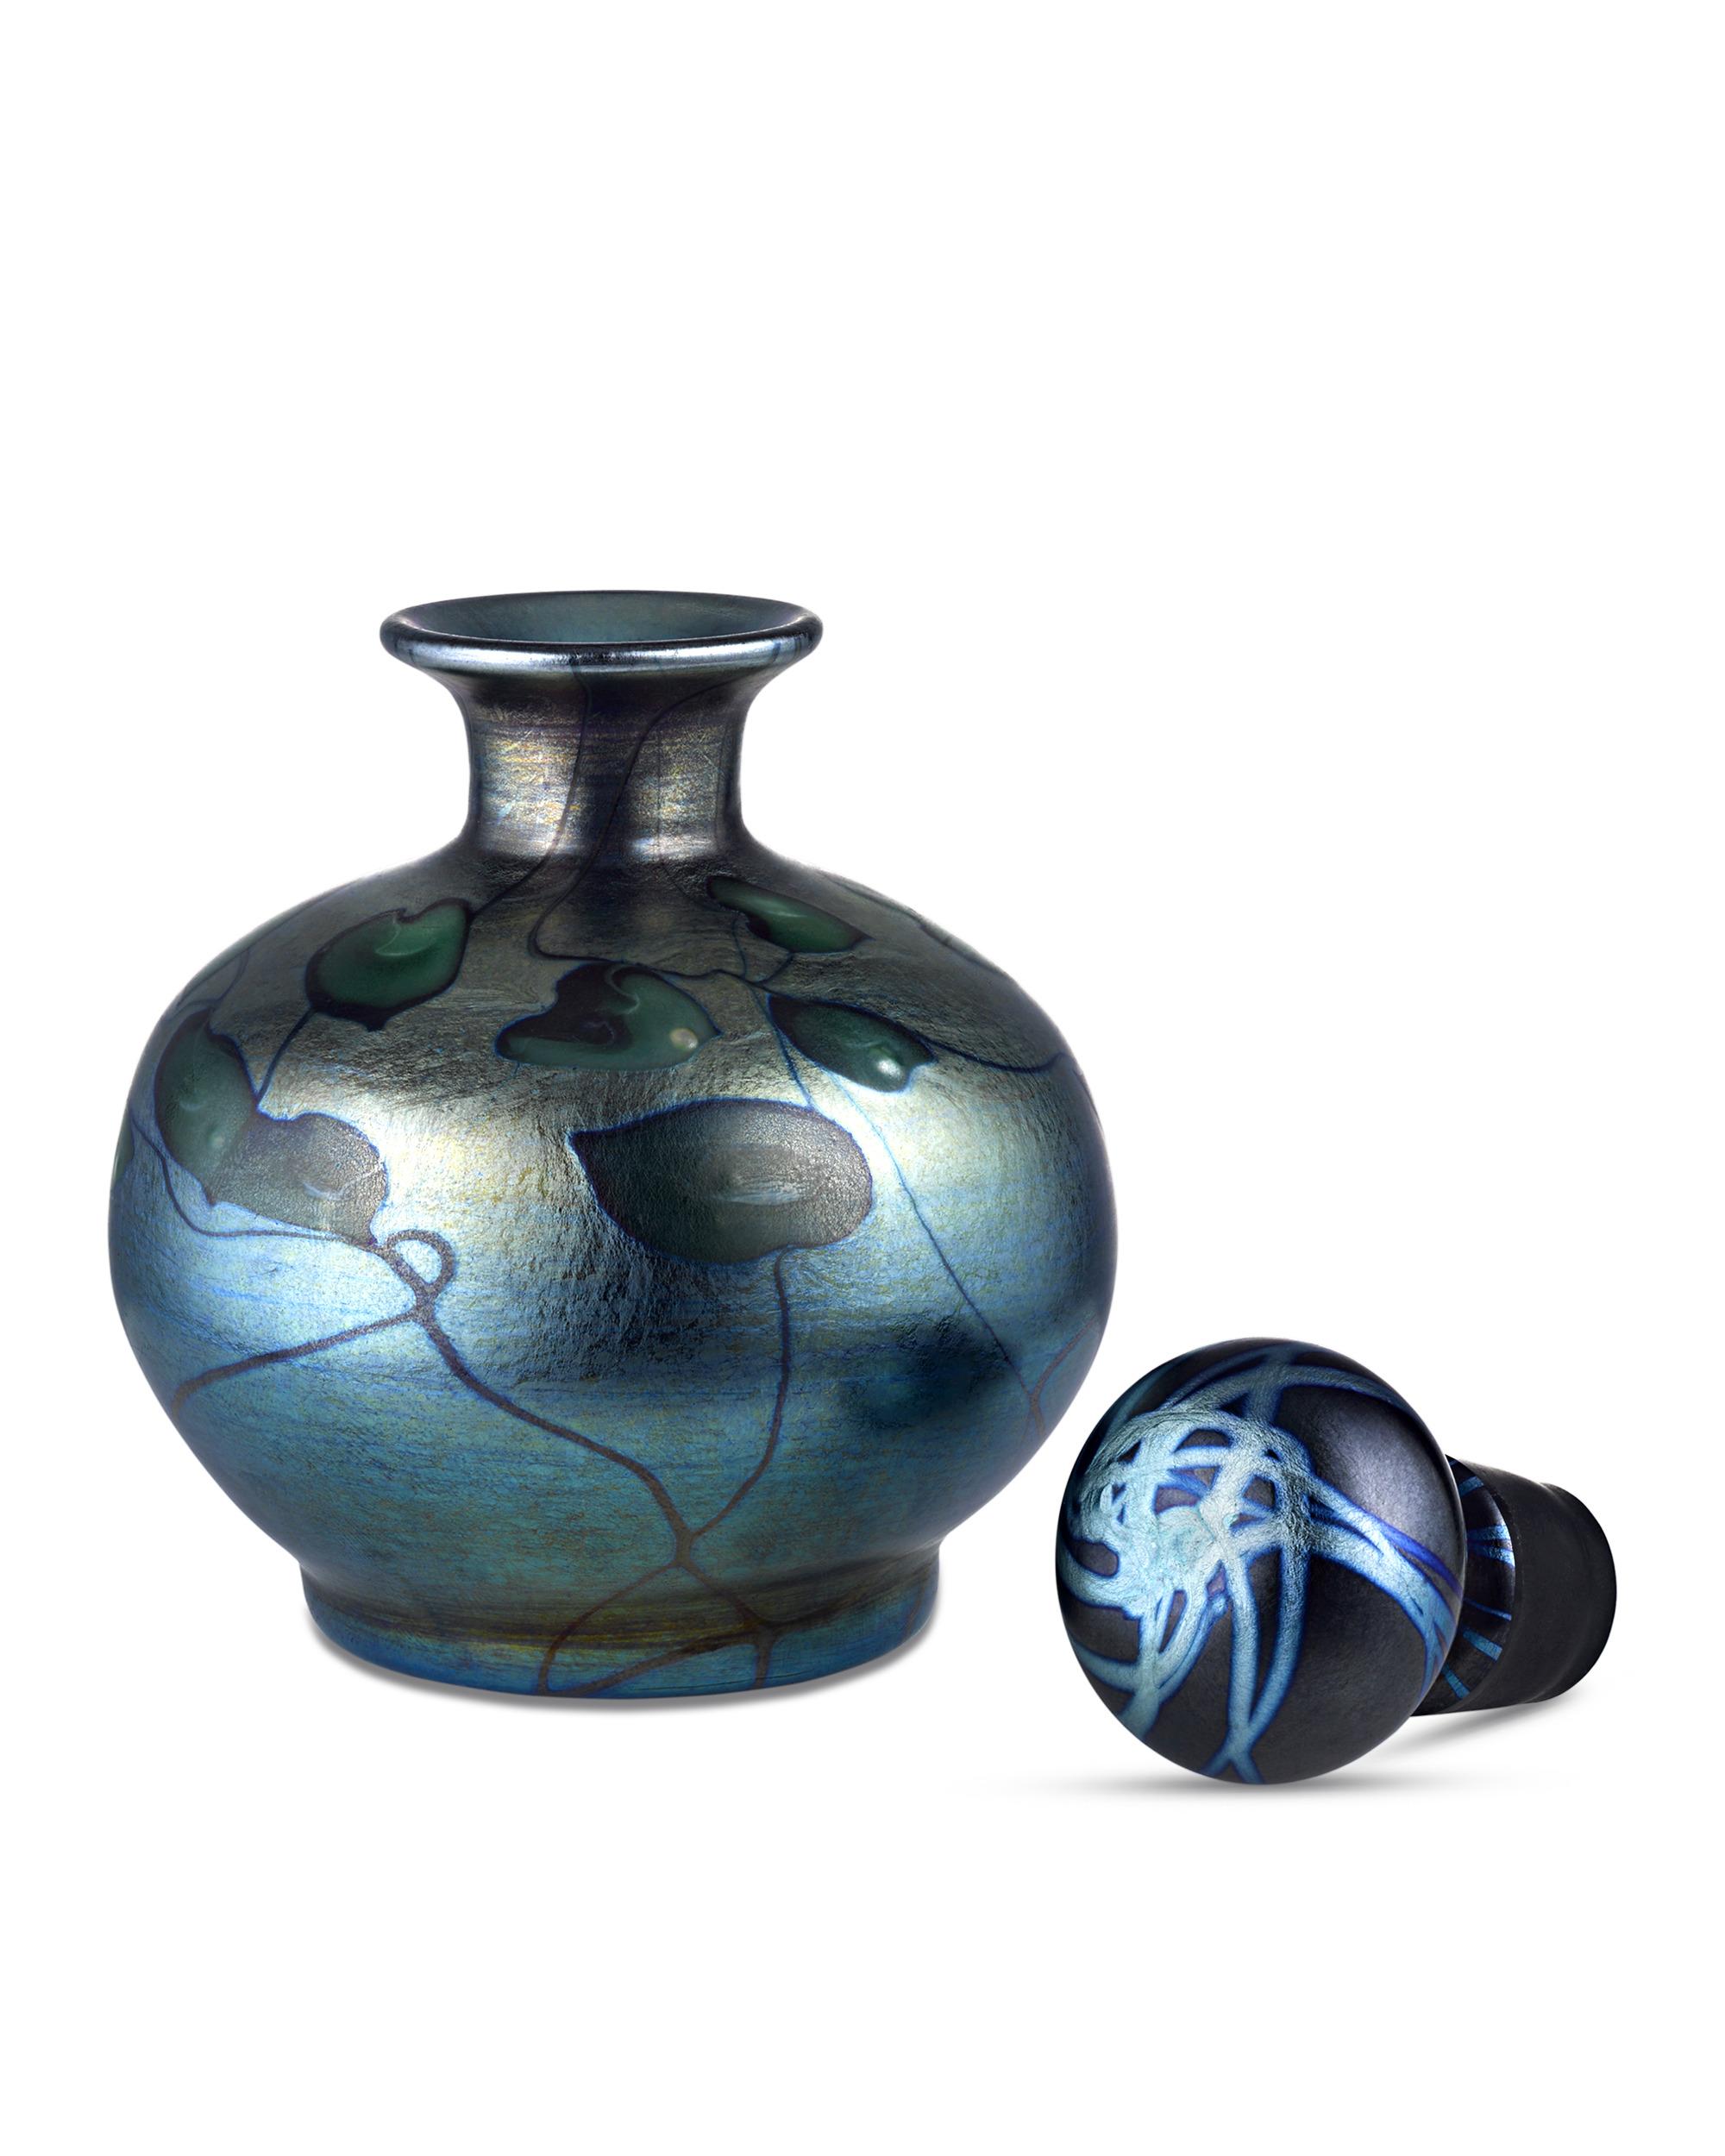 This sophisticated Tiffany Studios Favrile glass perfume vessel features the desirable Heart and Vine pattern. The iridescent blue ground is marked with green heart-shaped leaves, creating a highly dimensional effect. The lustrous shine of the